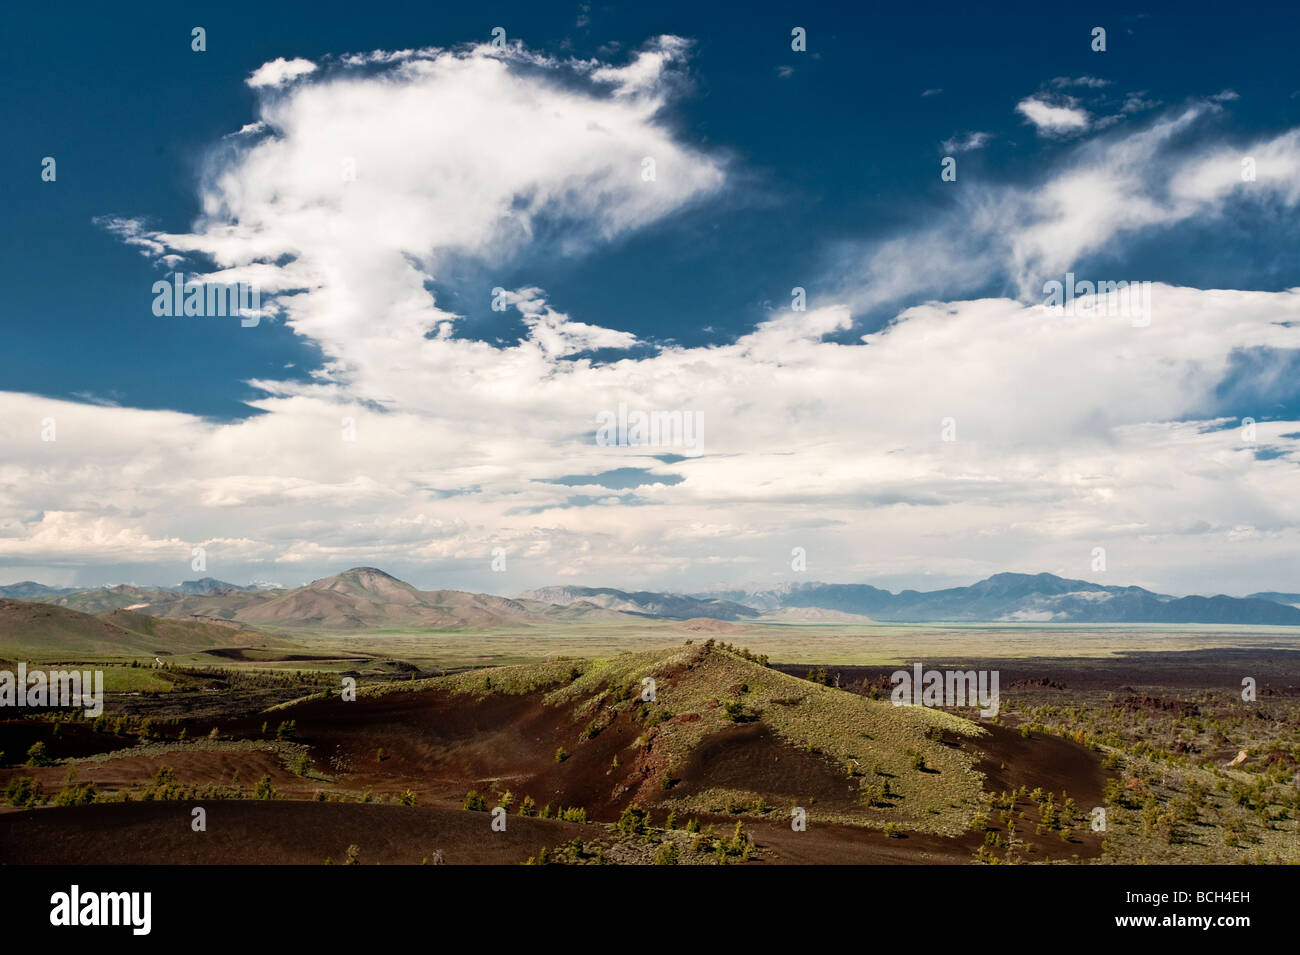 Clouds and landscape at Craters of the Moon National Monument Idaho Stock Photo